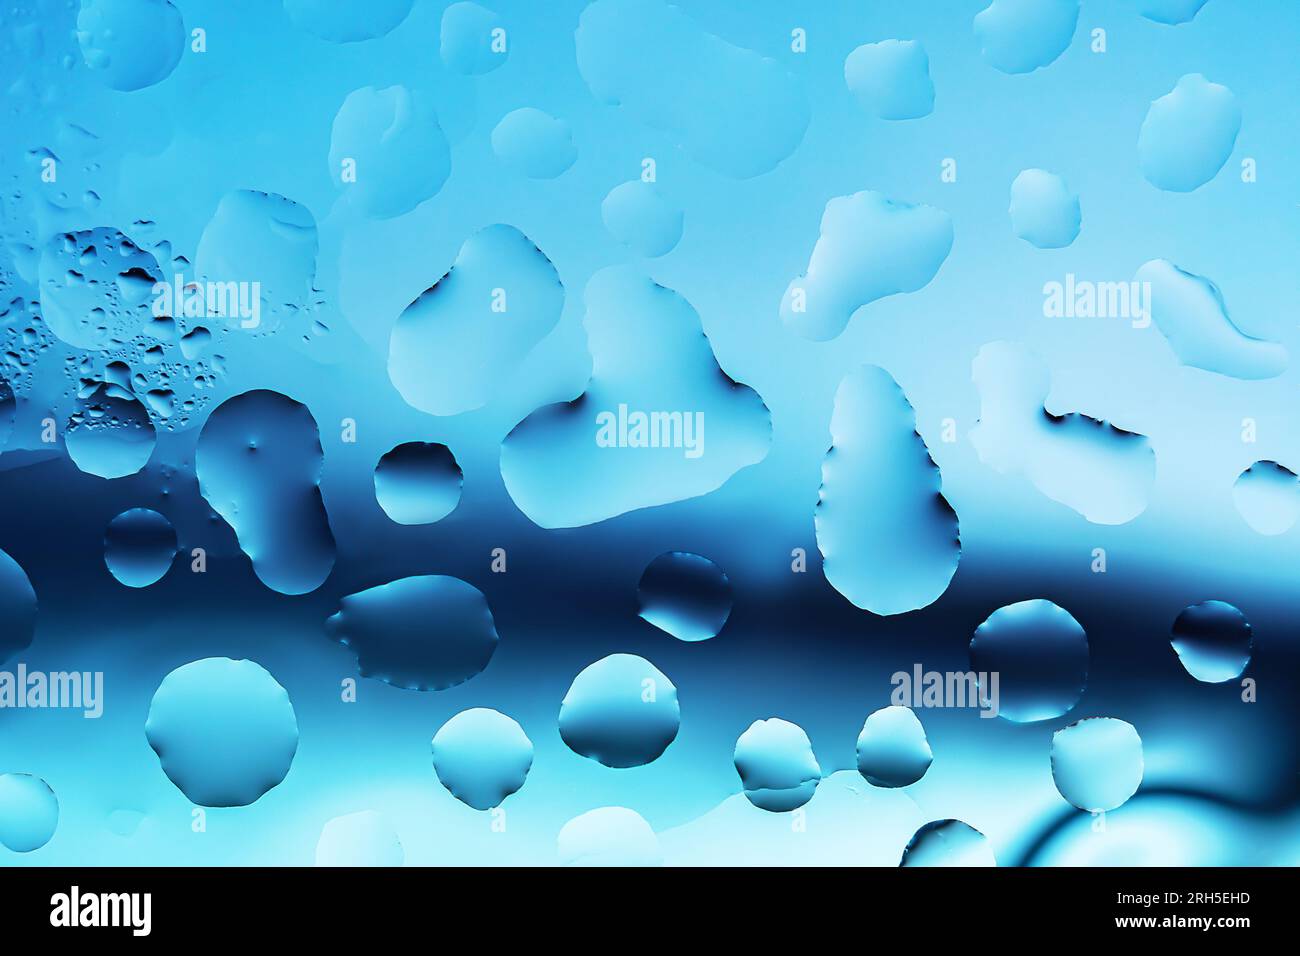 Water drops on a glass surface close up Stock Photo